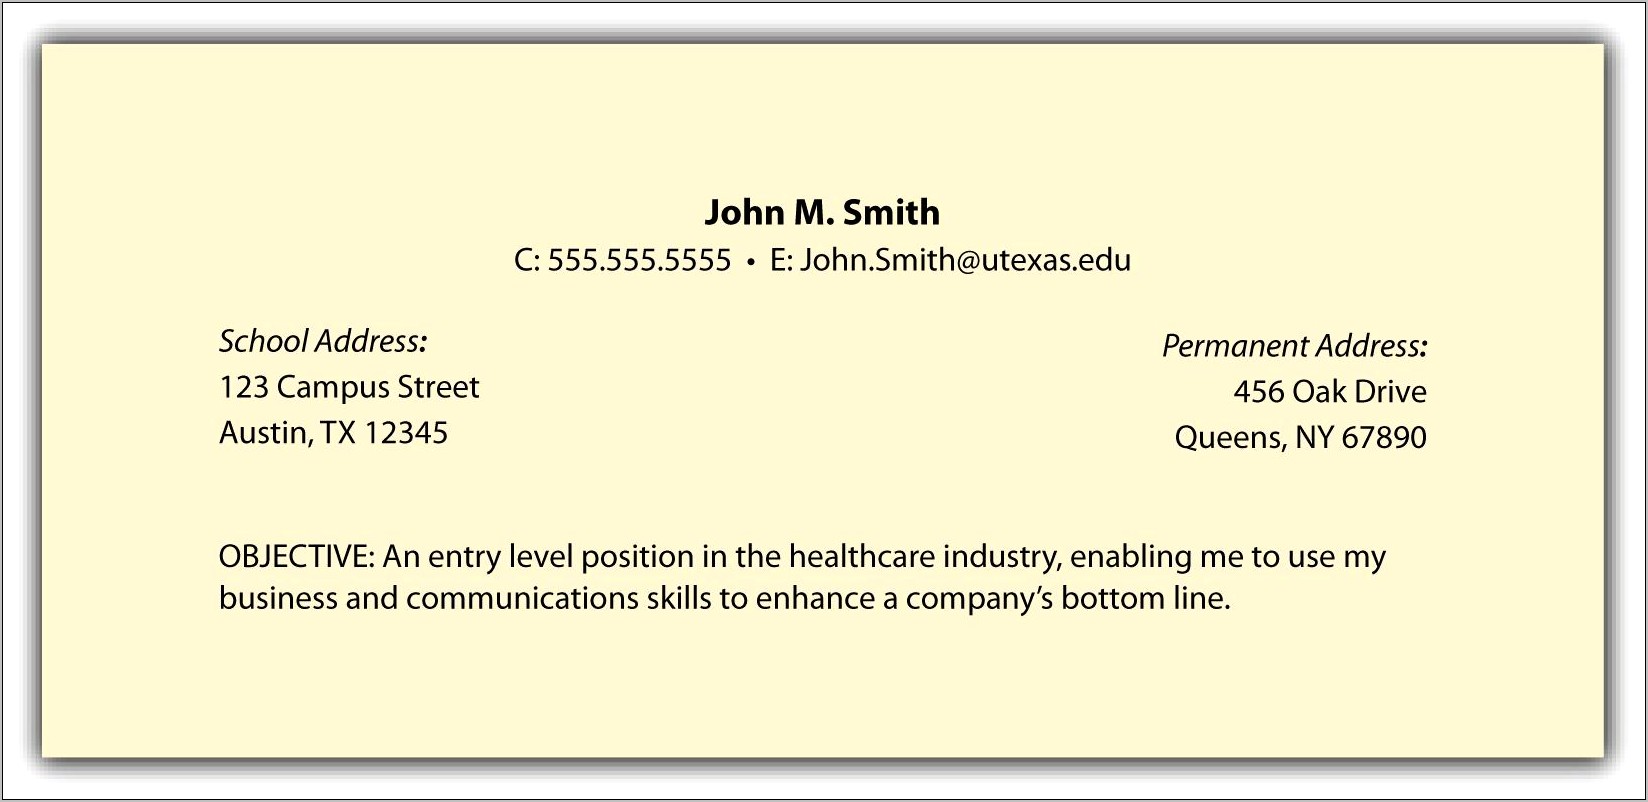 Examples Of Objective Statement In Resumes